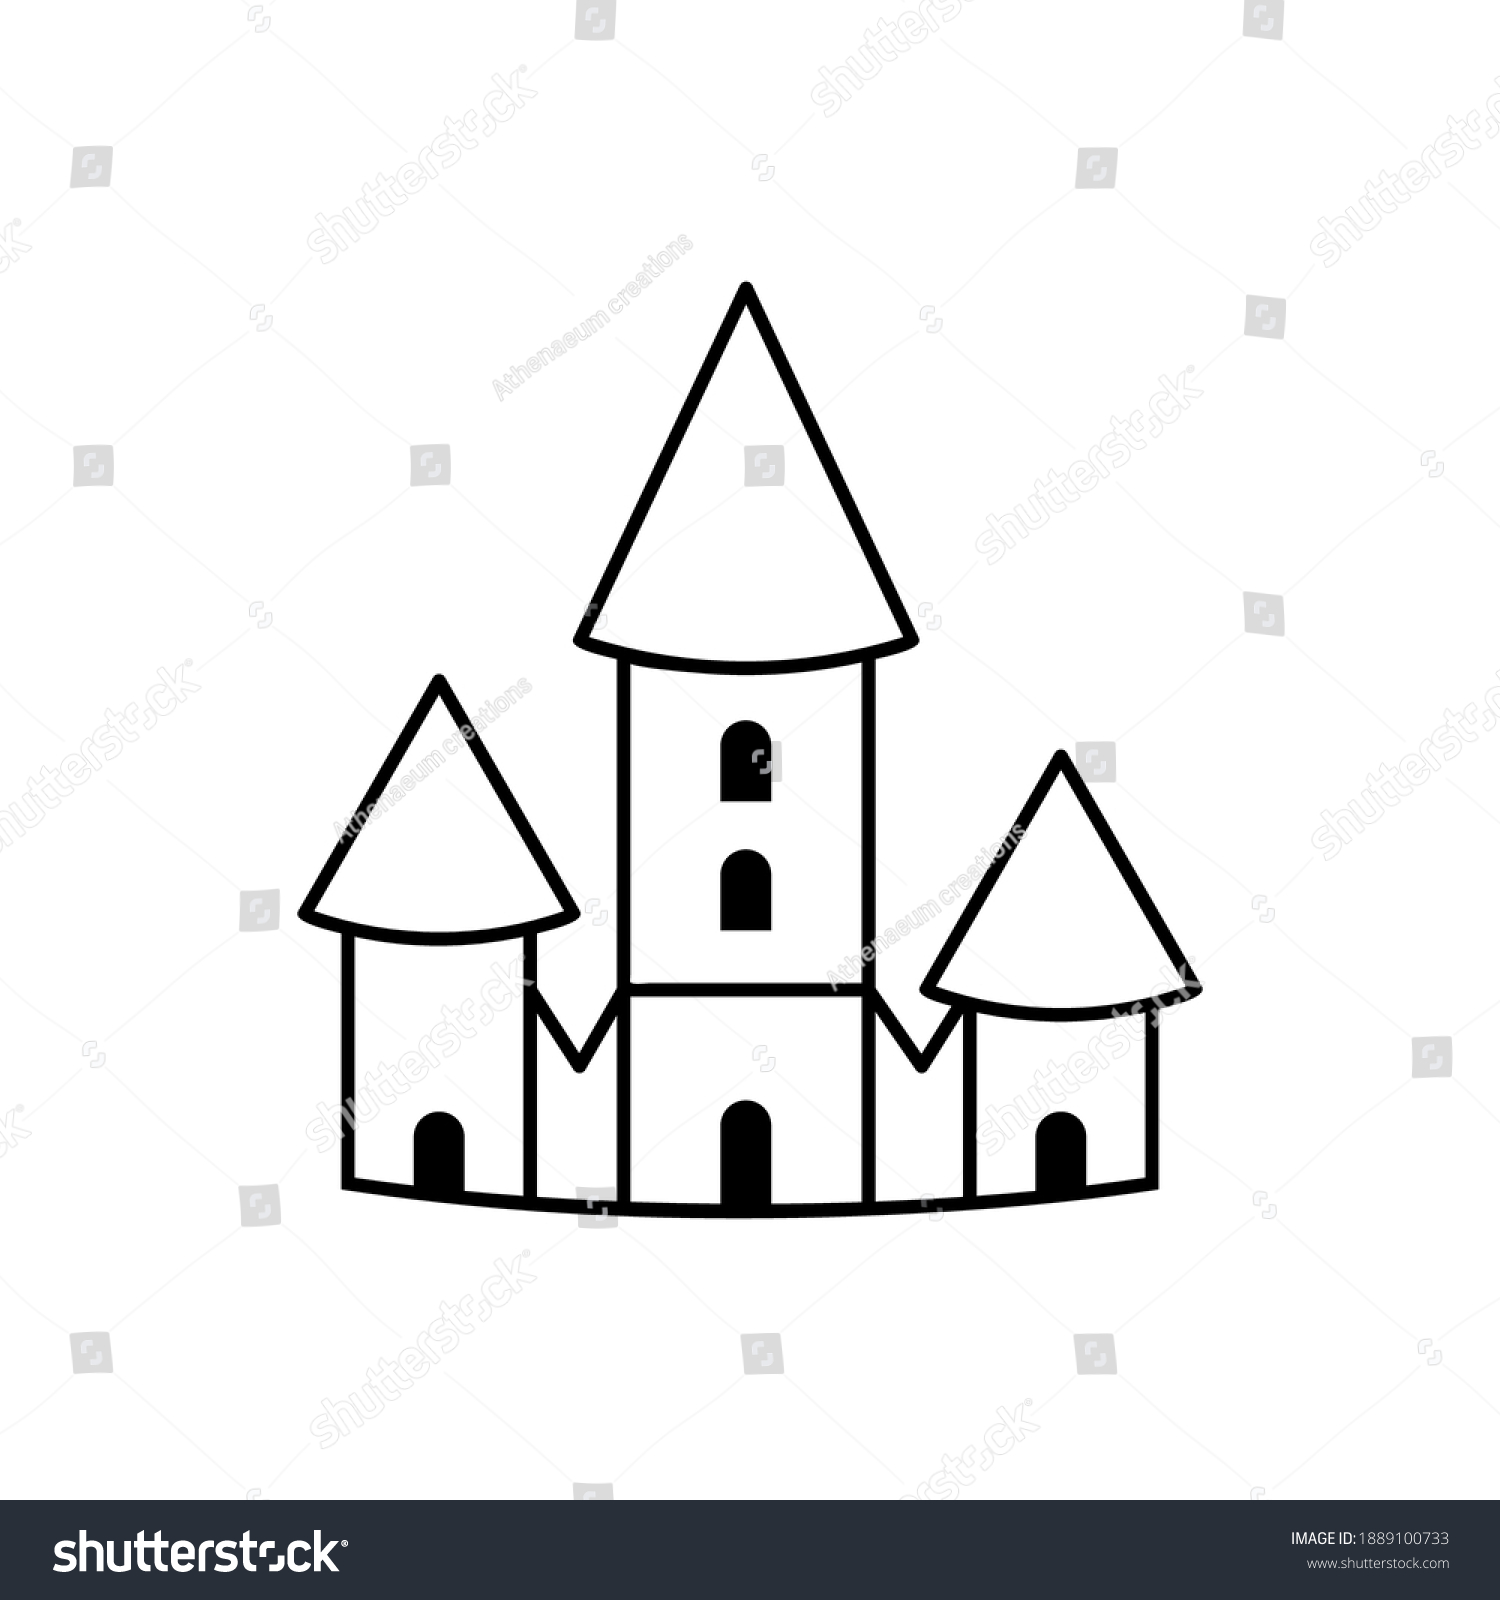 SVG of Castle icon. Landmark concept. Birth Stats icon for Birth Announcement design. Baby Stats element. Vector illustration for decorating albums, metrics, posters and invitation cards for baby. svg